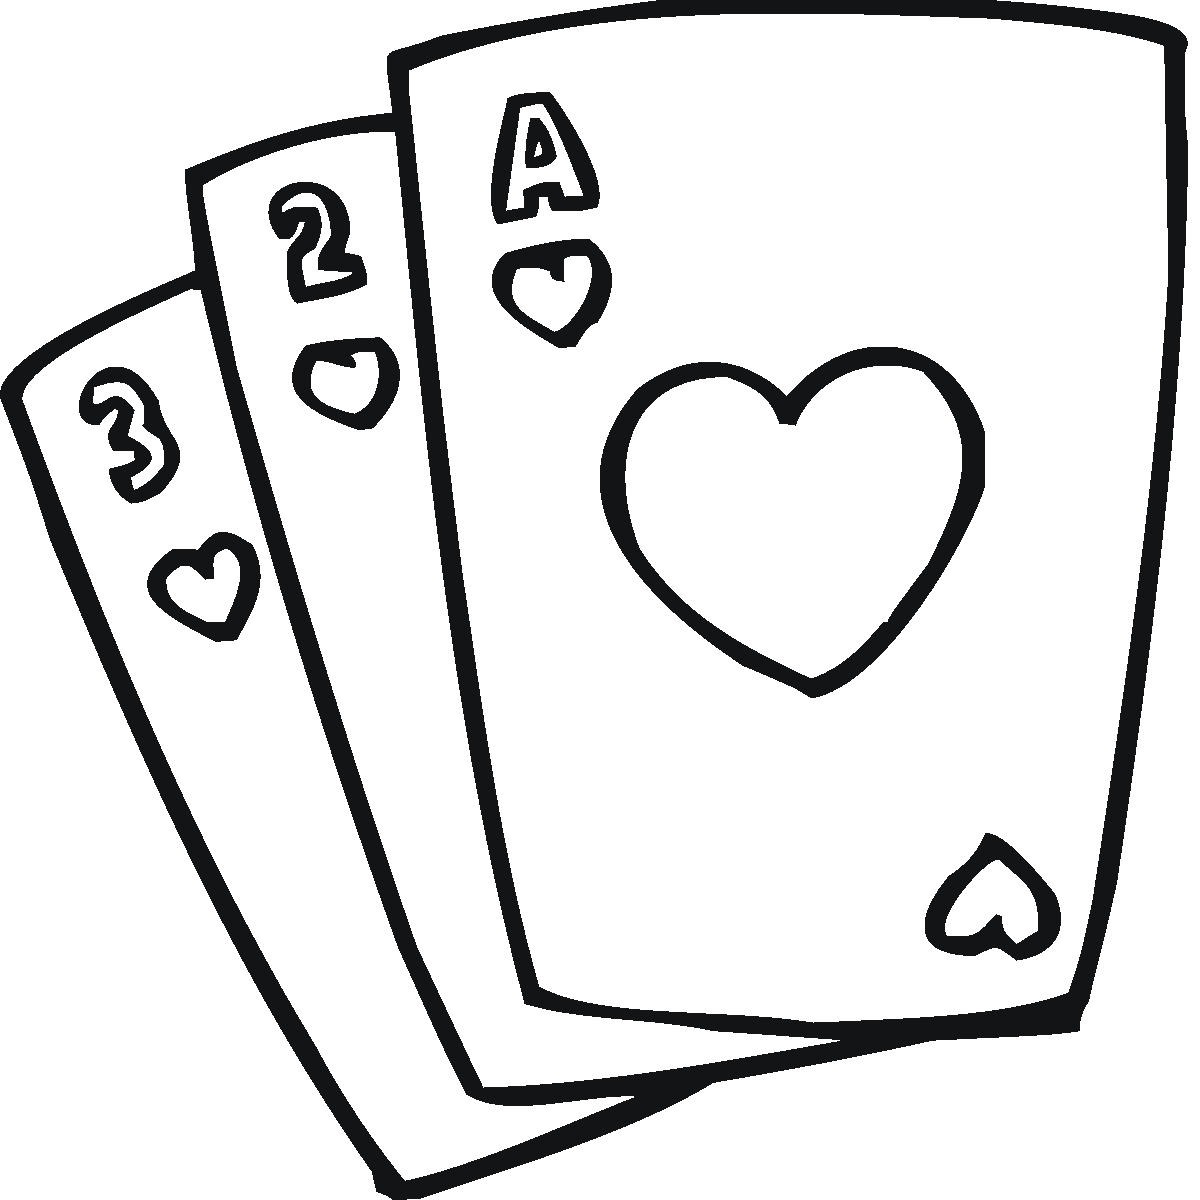 Playing cards clipart bridge 